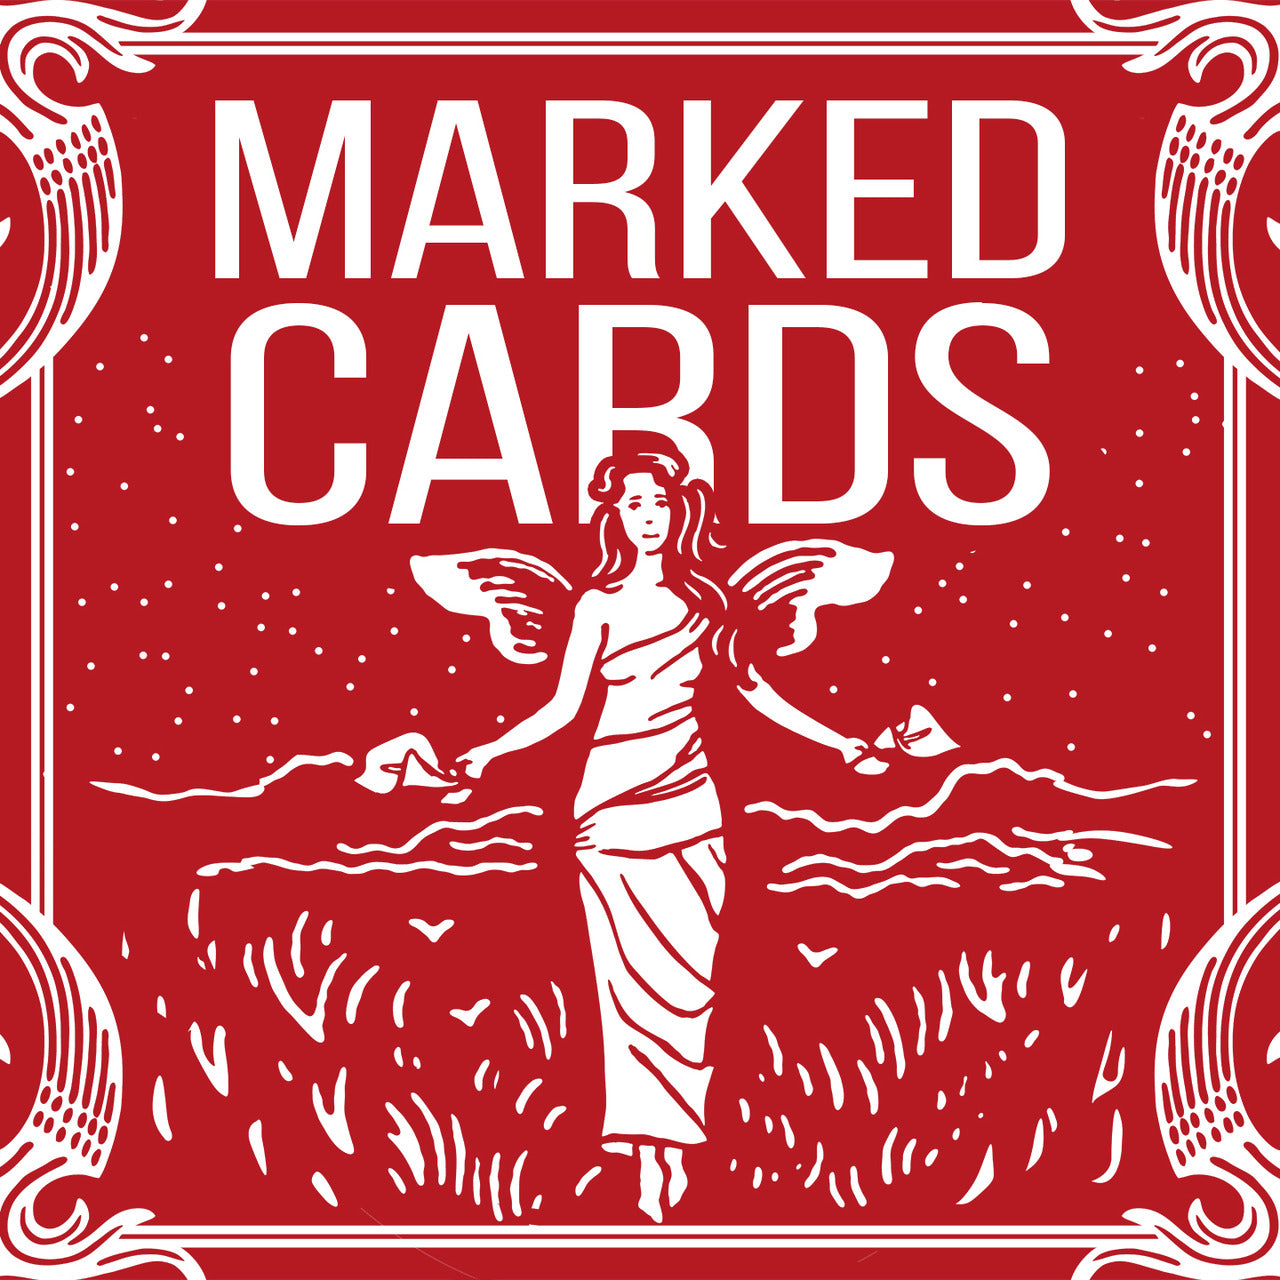 Marked Cards (Red) by Penguin Magic